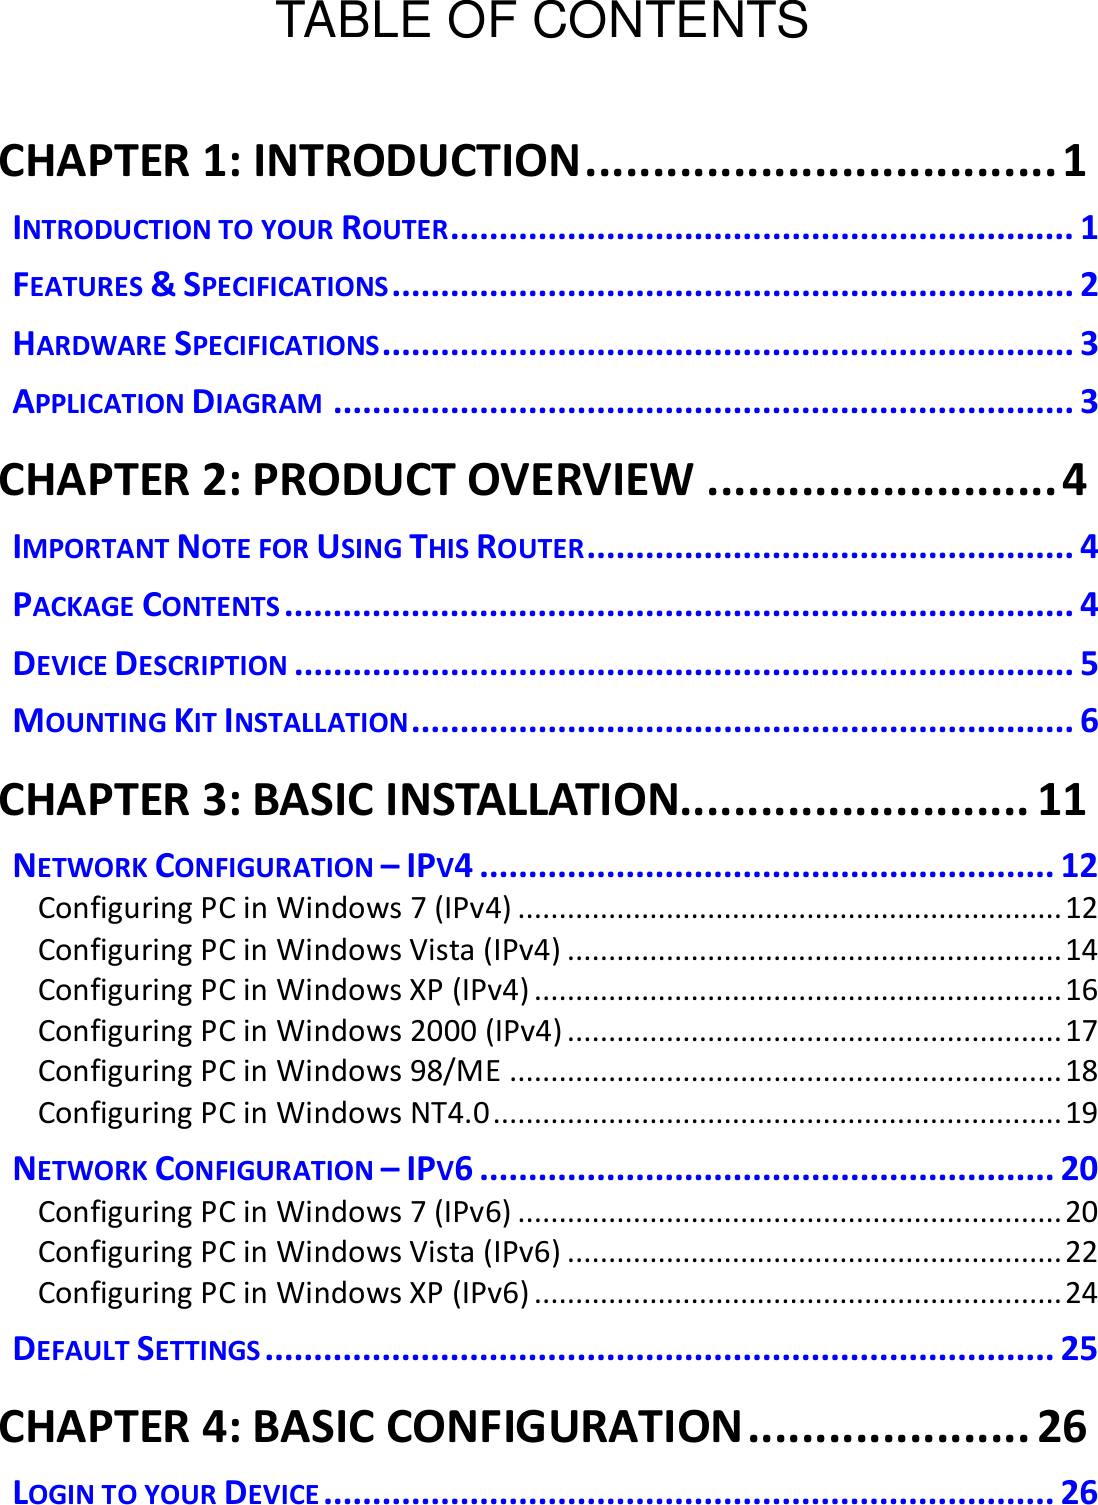  TABLE OF CONTENTS  CHAPTER 1: INTRODUCTION ................................... 1 INTRODUCTION TO YOUR ROUTER................................................................ 1 FEATURES &amp; SPECIFICATIONS ...................................................................... 2 HARDWARE SPECIFICATIONS ....................................................................... 3 APPLICATION DIAGRAM ............................................................................ 3 CHAPTER 2: PRODUCT OVERVIEW .......................... 4 IMPORTANT NOTE FOR USING THIS ROUTER .................................................. 4 PACKAGE CONTENTS ................................................................................. 4 DEVICE DESCRIPTION ................................................................................ 5 MOUNTING KIT INSTALLATION .................................................................... 6 CHAPTER 3: BASIC INSTALLATION.......................... 11 NETWORK CONFIGURATION – IPV4 ........................................................... 12 Configuring PC in Windows 7 (IPv4) .................................................................. 12 Configuring PC in Windows Vista (IPv4) ............................................................ 14 Configuring PC in Windows XP (IPv4) ................................................................ 16 Configuring PC in Windows 2000 (IPv4) ............................................................ 17 Configuring PC in Windows 98/ME ................................................................... 18 Configuring PC in Windows NT4.0 ..................................................................... 19 NETWORK CONFIGURATION – IPV6 ........................................................... 20 Configuring PC in Windows 7 (IPv6) .................................................................. 20 Configuring PC in Windows Vista (IPv6) ............................................................ 22 Configuring PC in Windows XP (IPv6) ................................................................ 24 DEFAULT SETTINGS ................................................................................. 25 CHAPTER 4: BASIC CONFIGURATION ..................... 26 LOGIN TO YOUR DEVICE ........................................................................... 26 